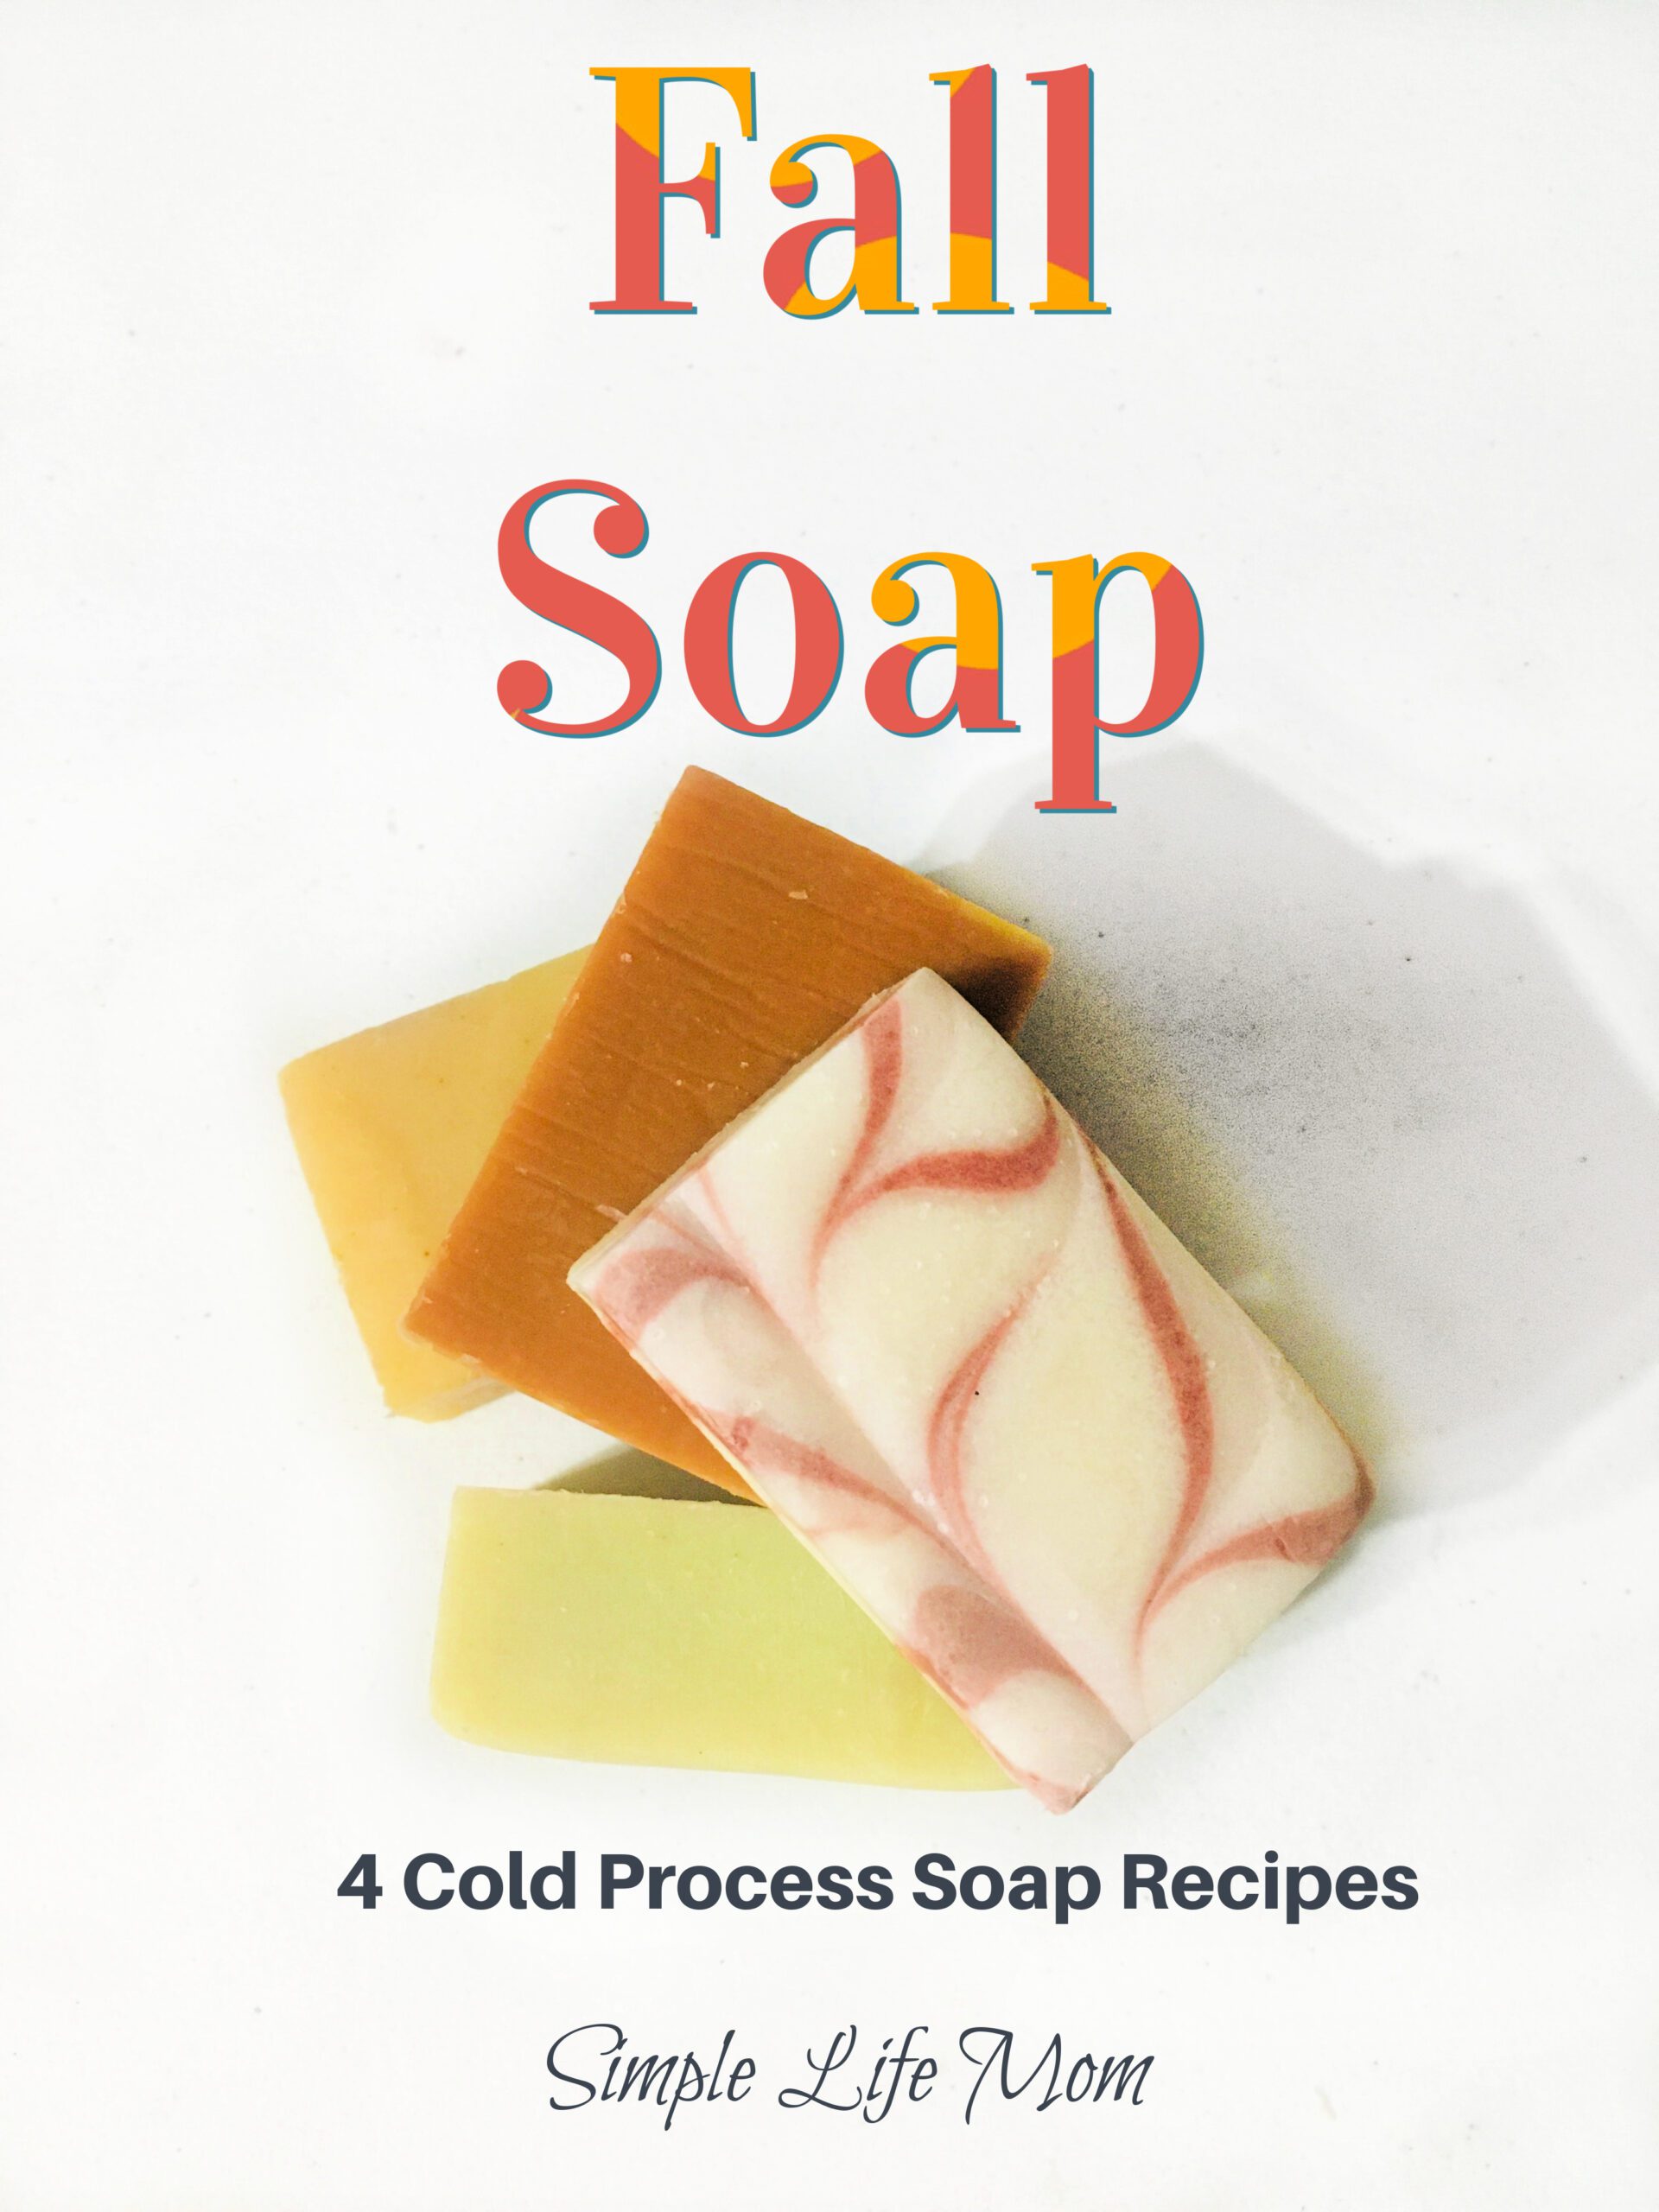 How to Make Soap without Lye: 3 Easy Recipes